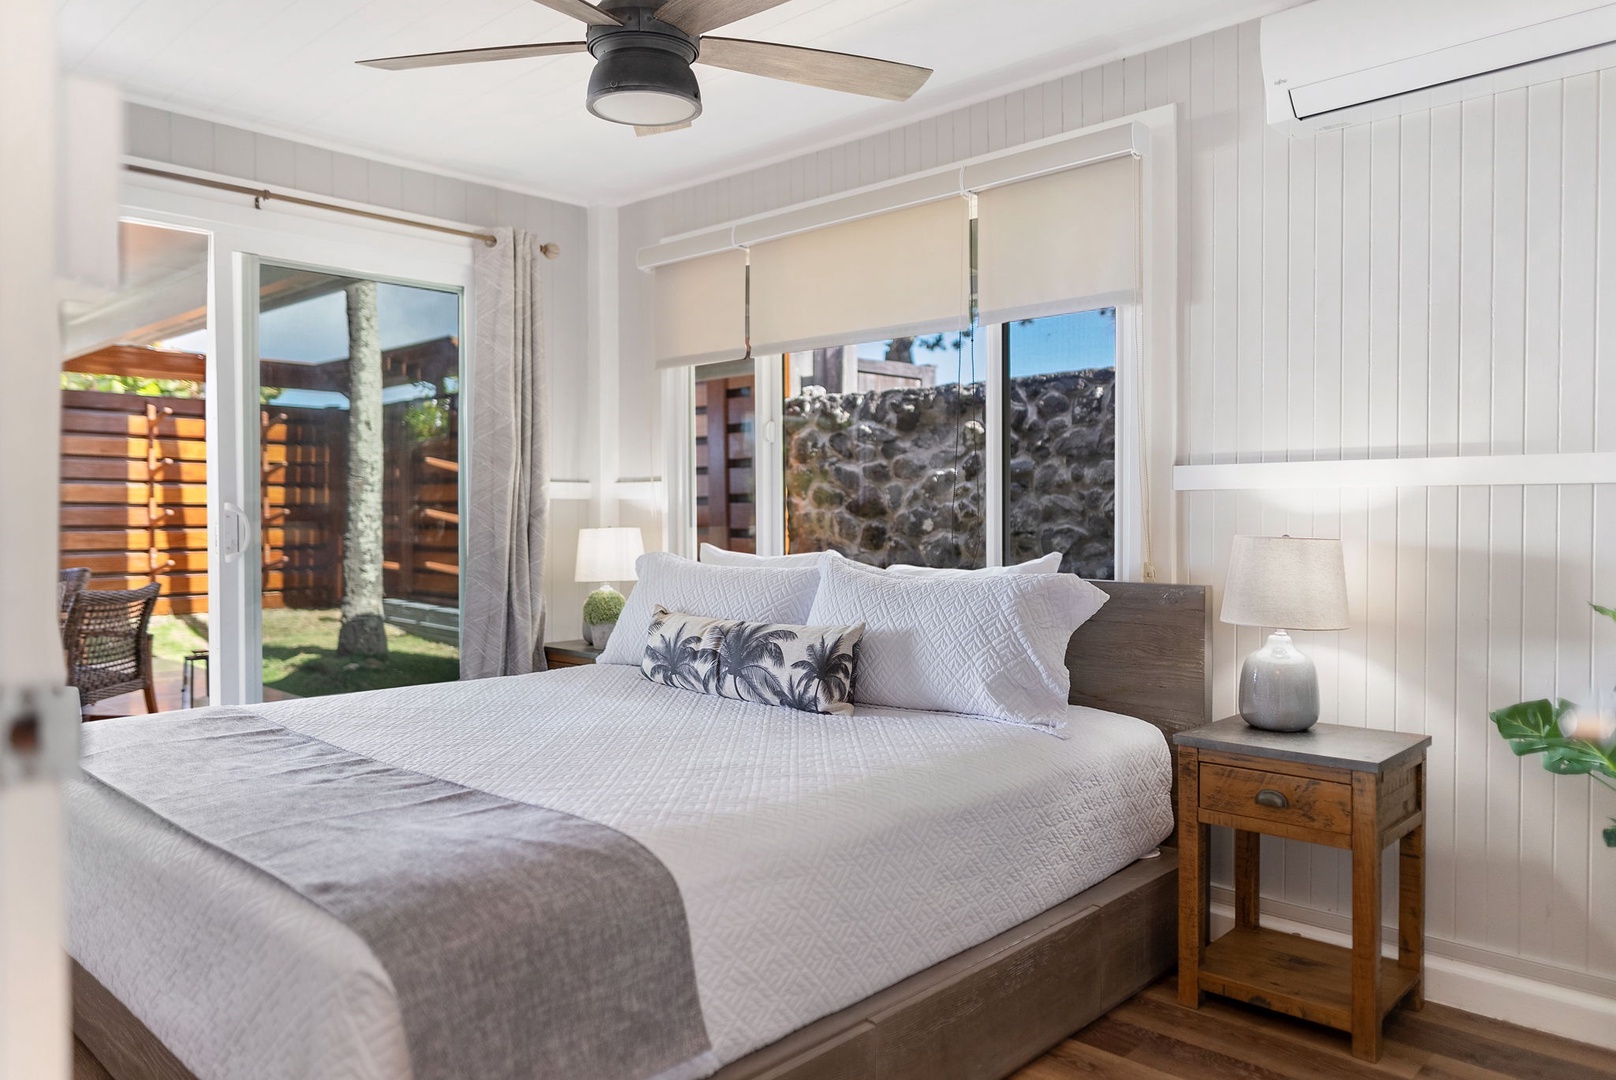 Haleiwa Vacation Rentals, Hale Nalu - Main Bedroom with plush king bed and luxury linens